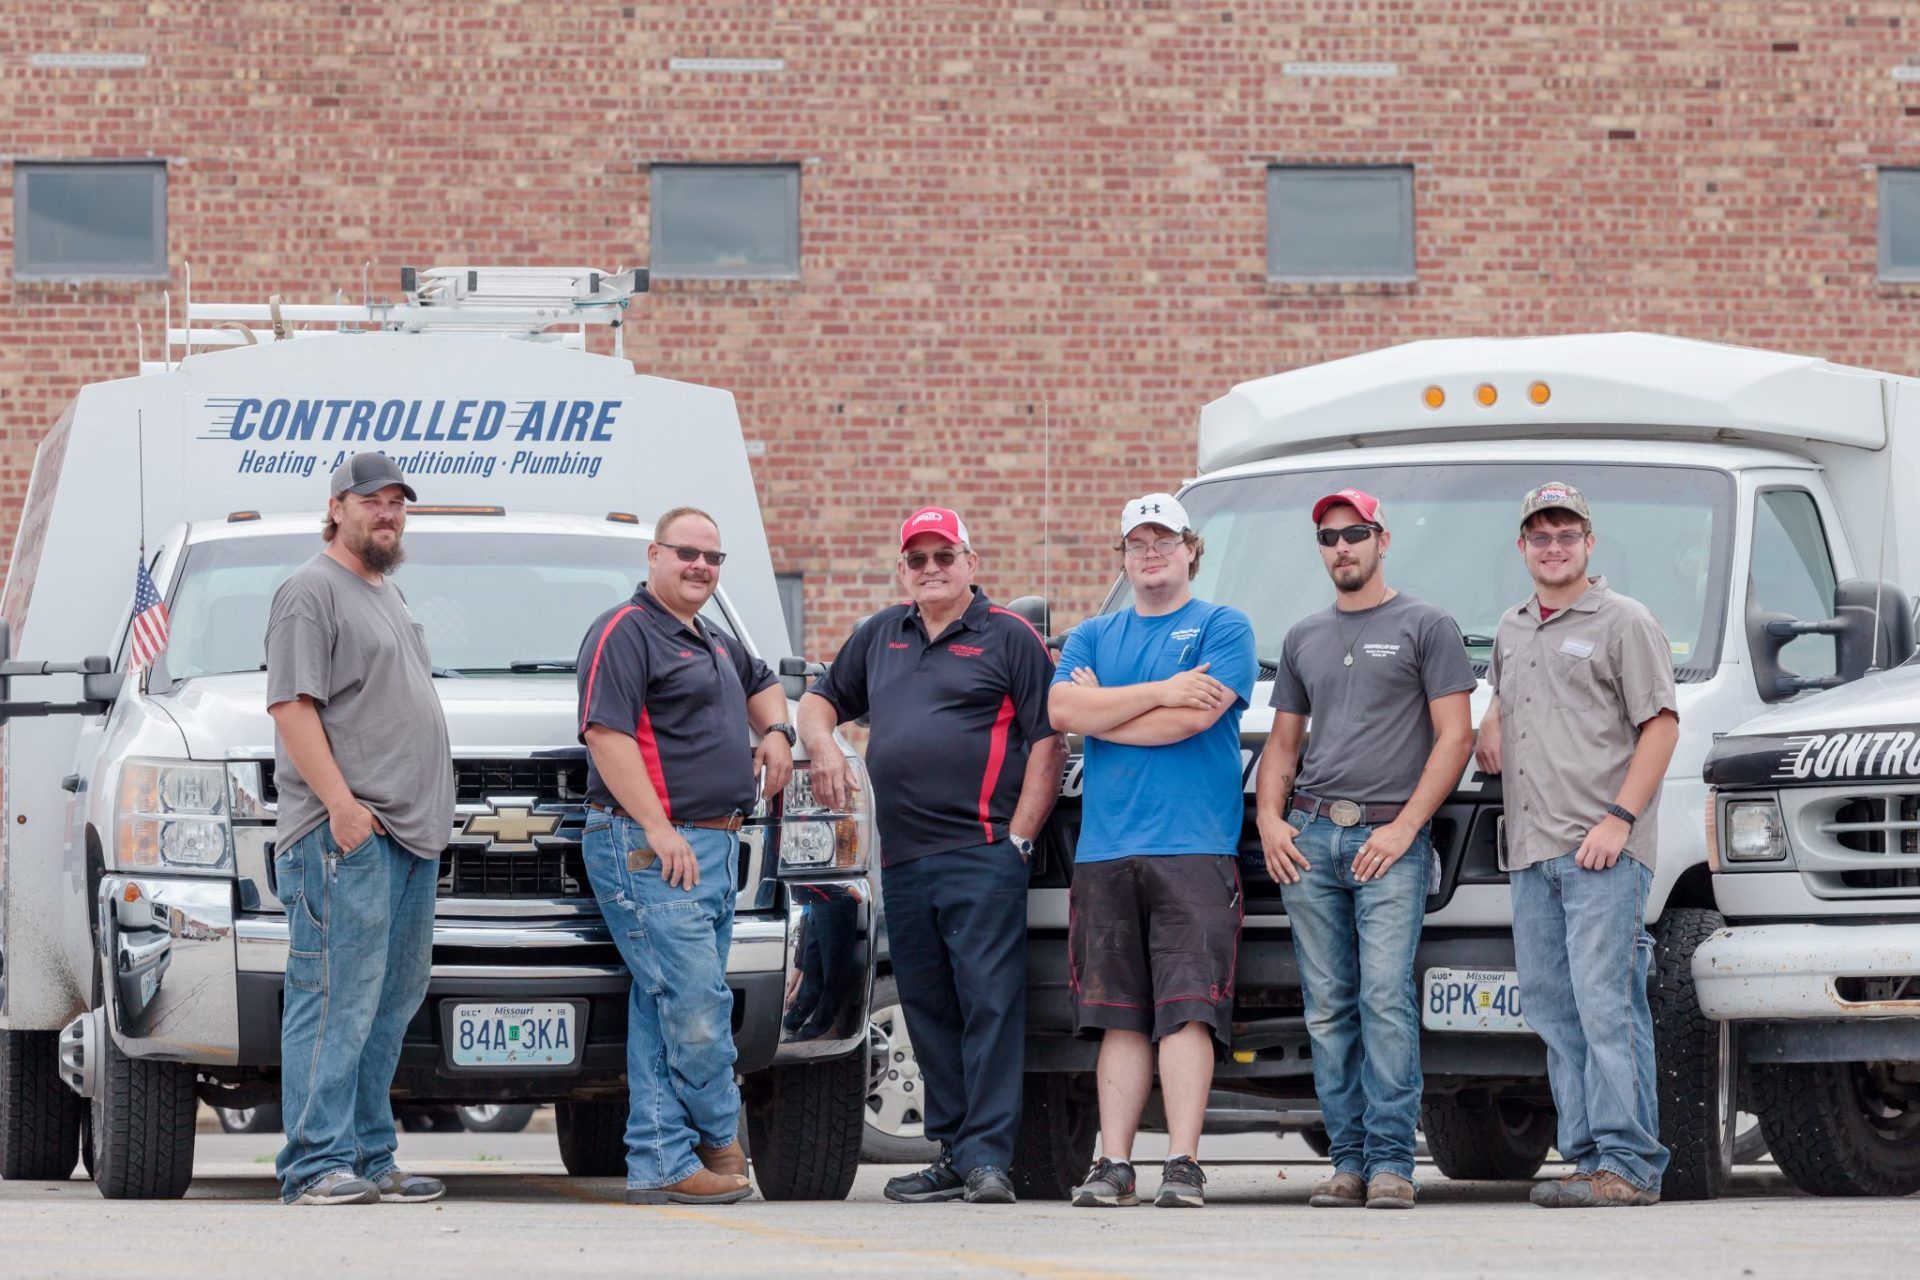 Moberly MO’s Expert Team in Providing High Quality Air Conditioning, Controlled Aire.